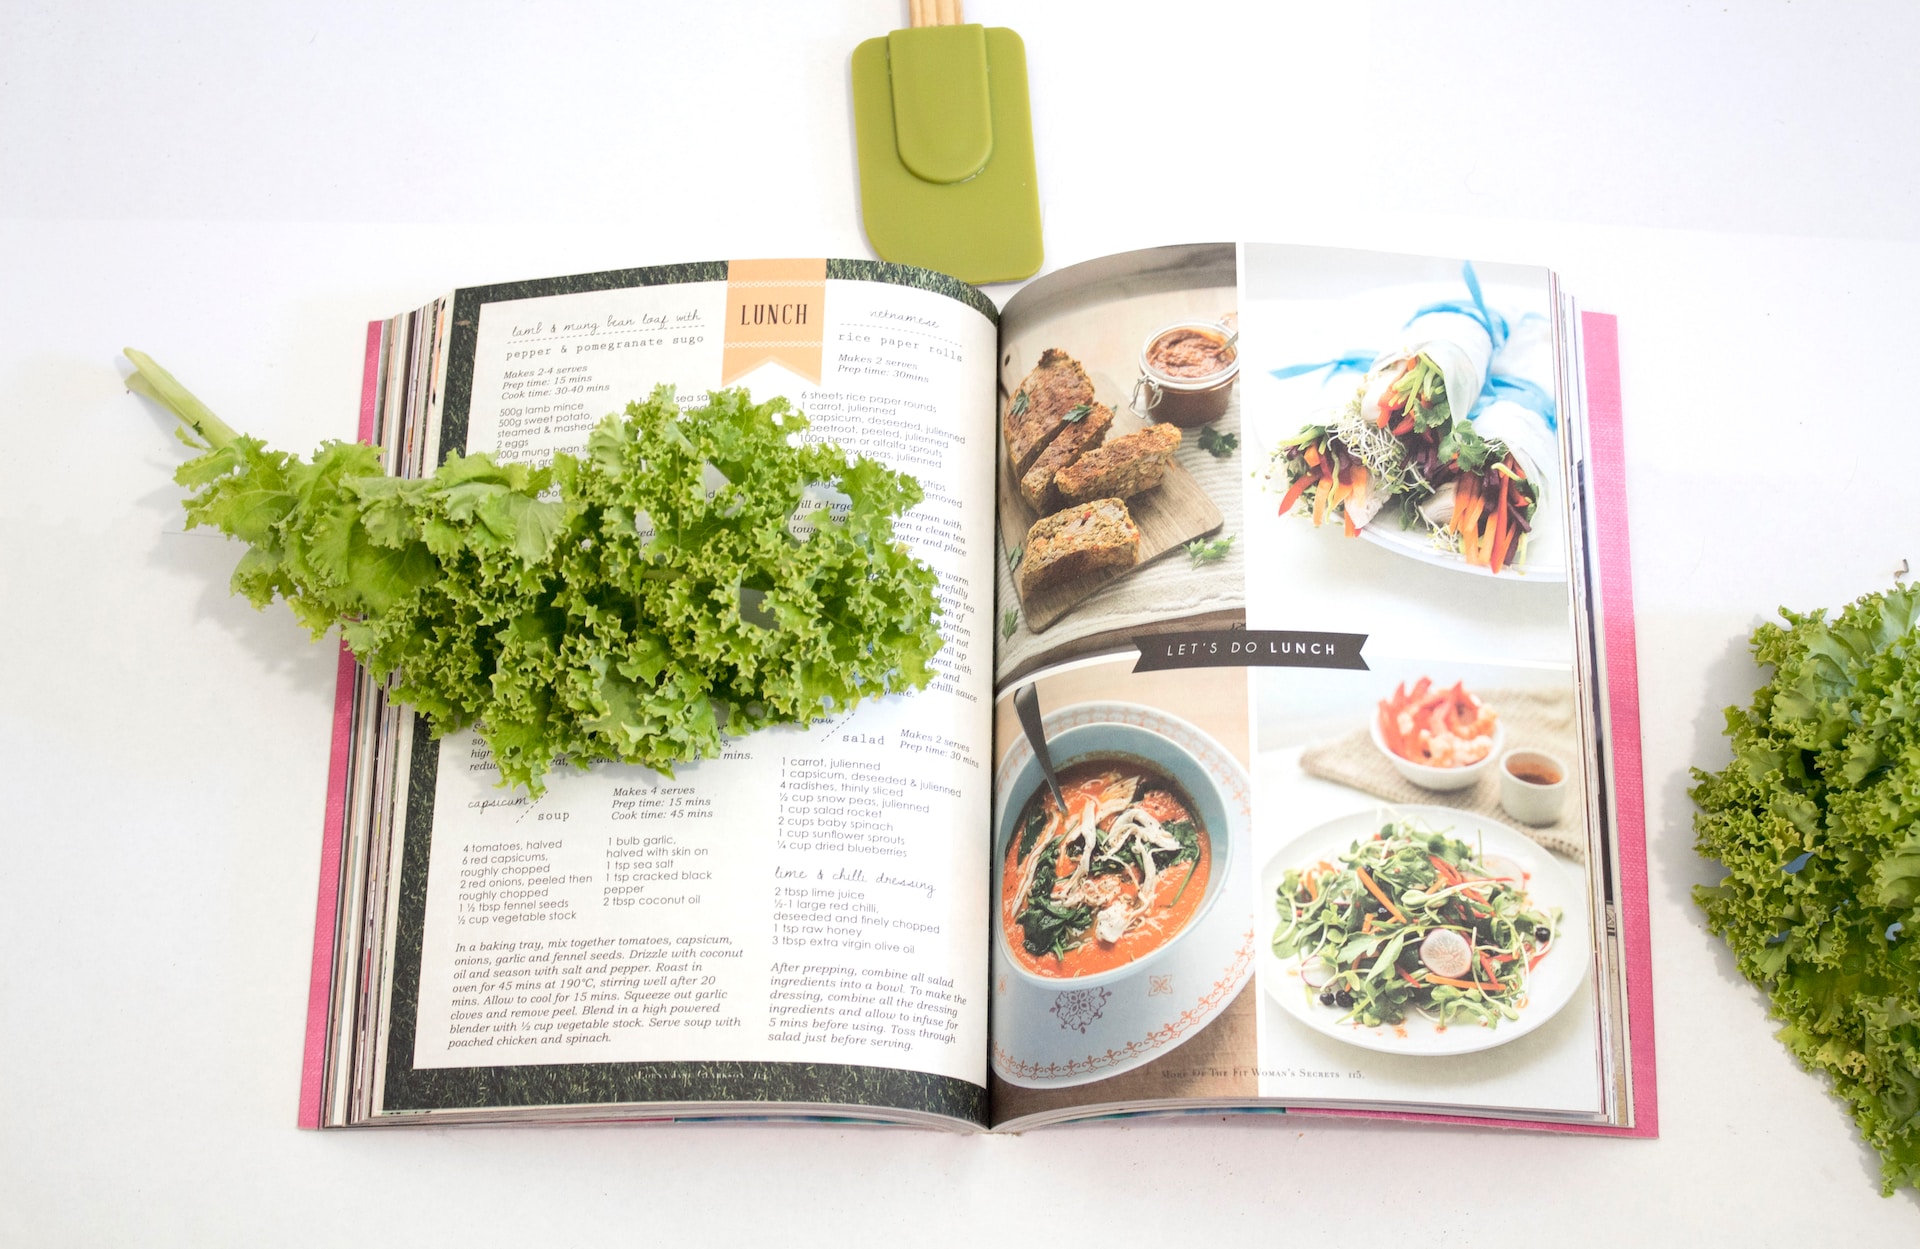 the image shows an open book with the recipes